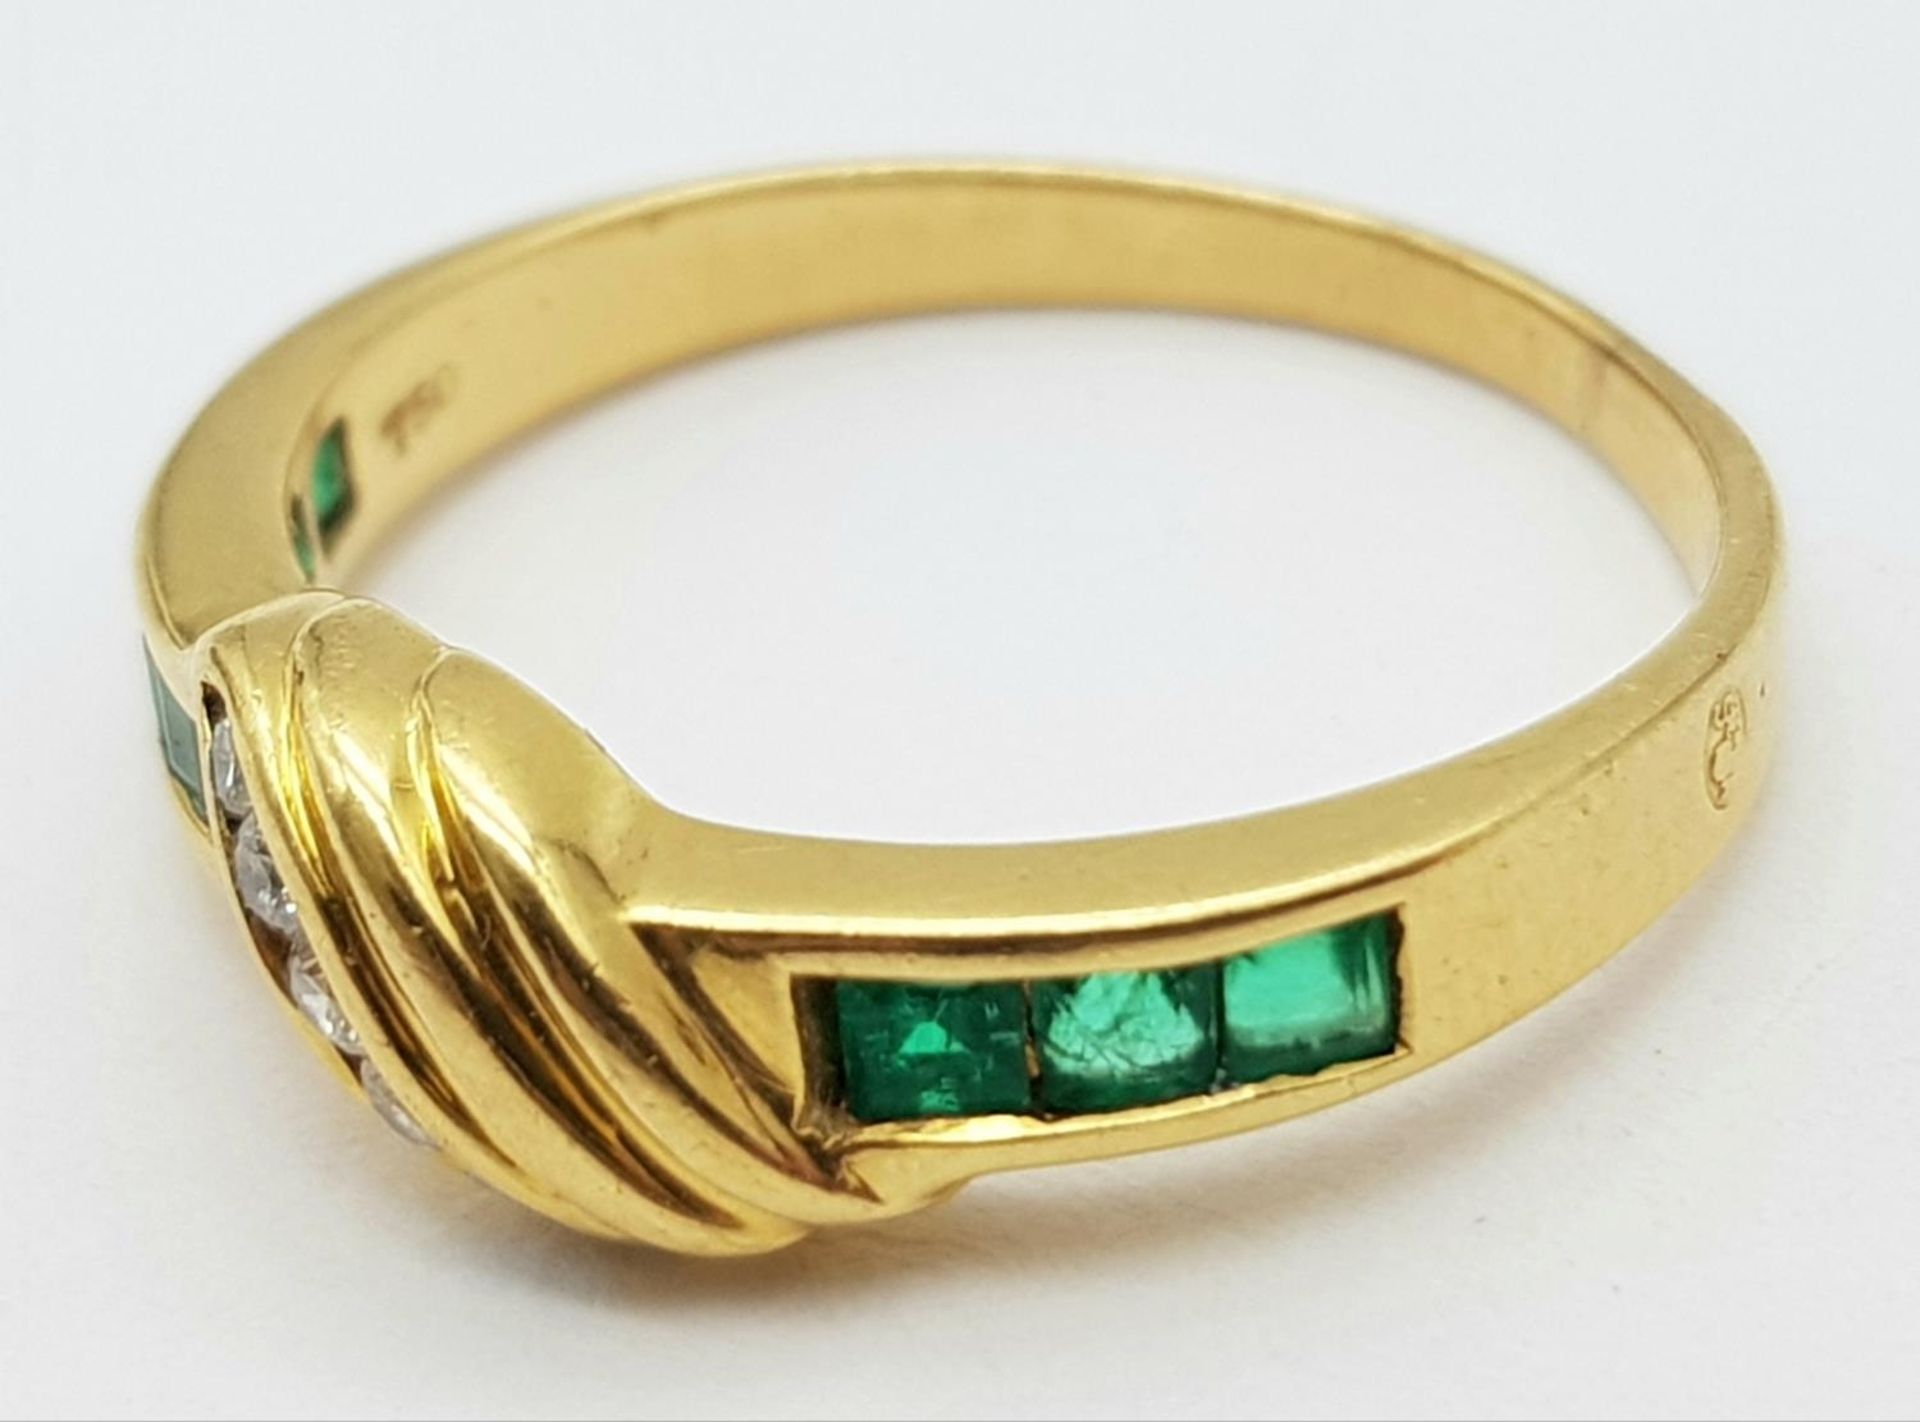 AN 18K YELLOW GOLD DIAMOND & EMERALD RING. Size J, 2.3g total weight. Ref: SC 9052 - Image 3 of 6